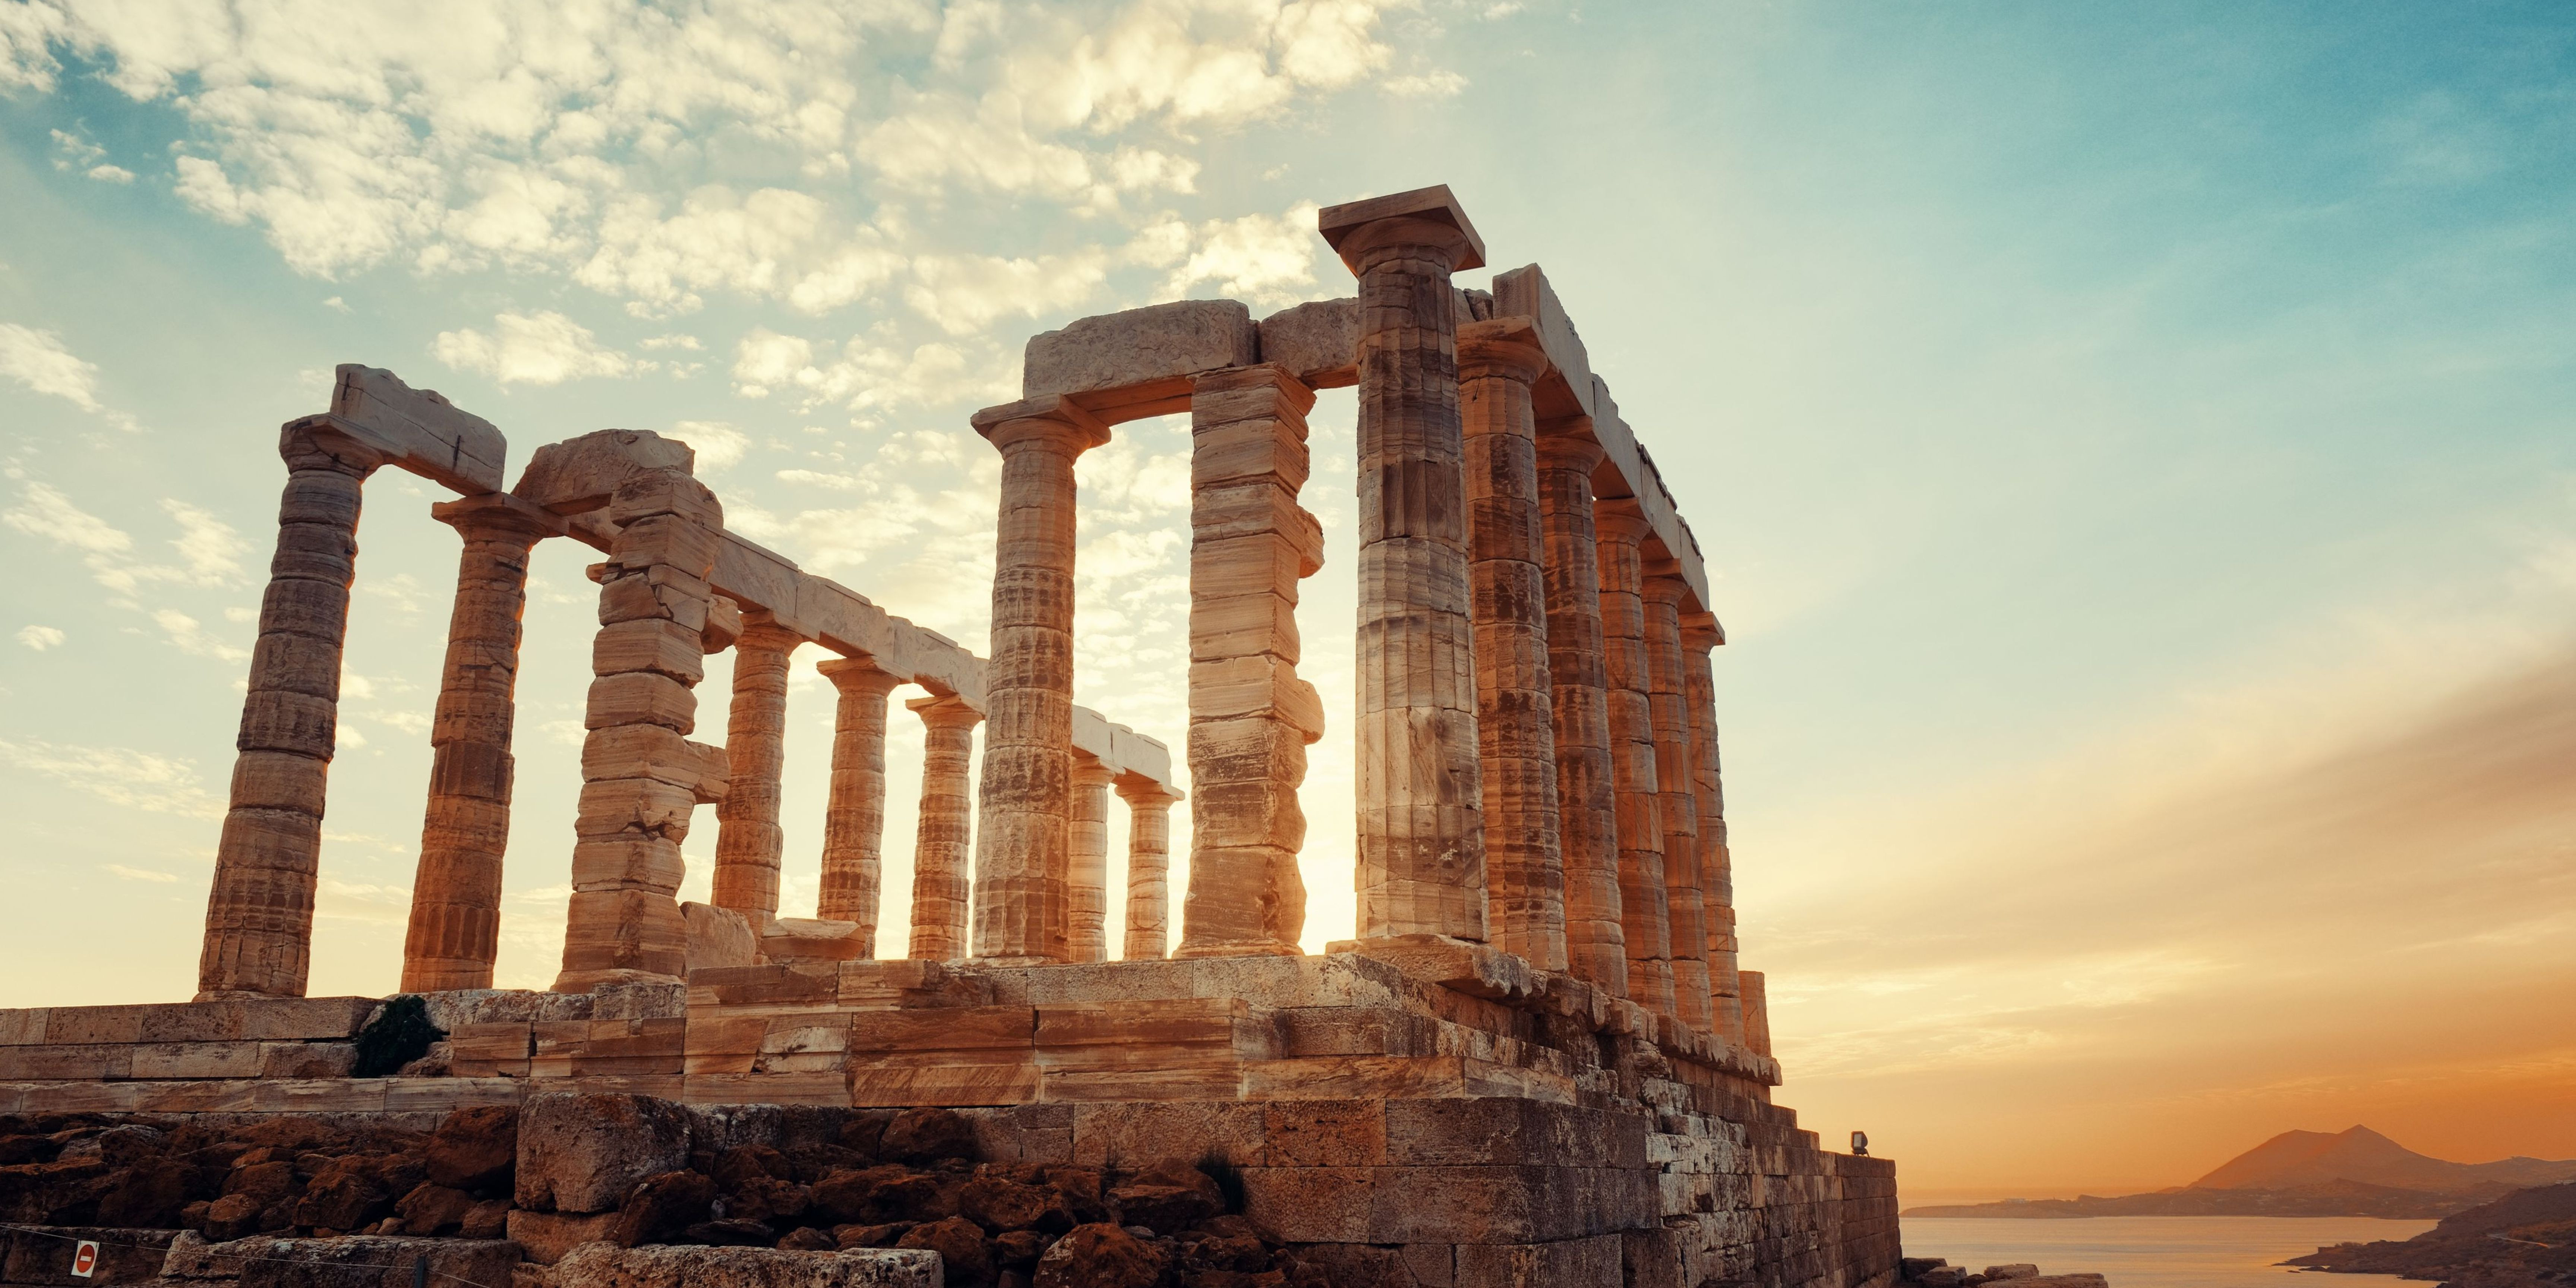 Sunset view of the Temple of Poseidon ruins with the sea in the background.